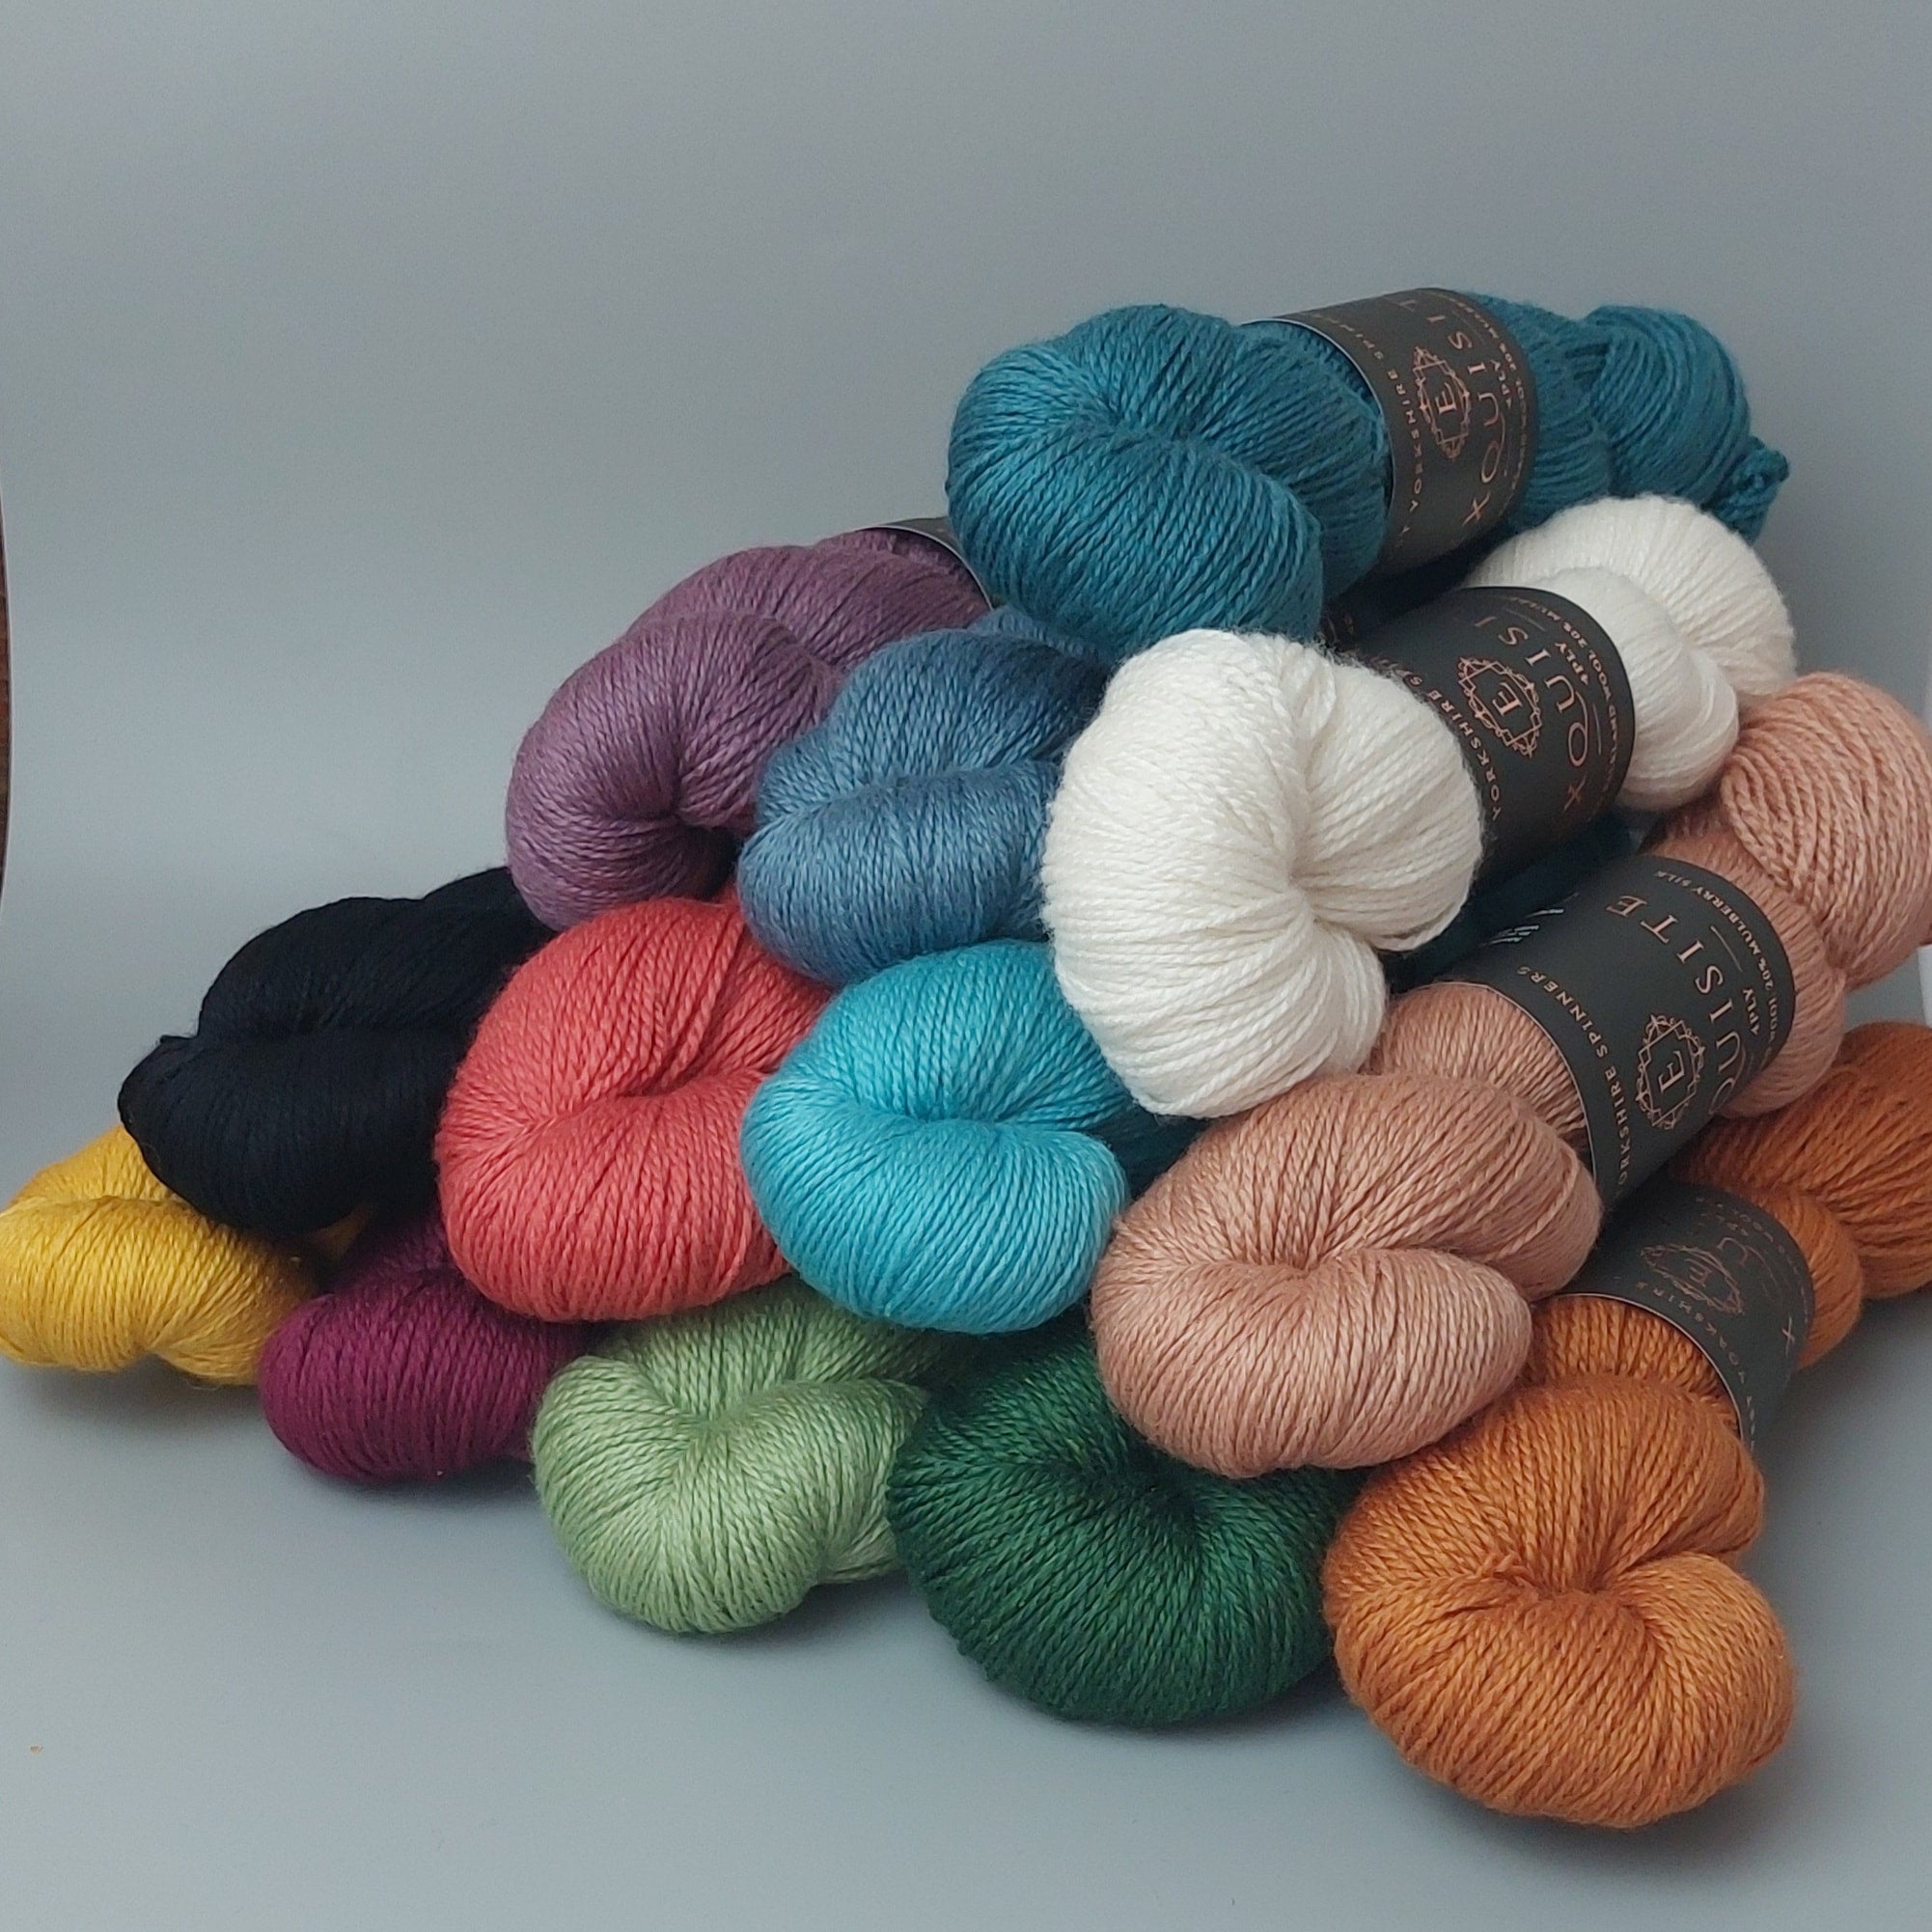 WYS Exquisite 4 Ply 177 Baroque – Wool and Company